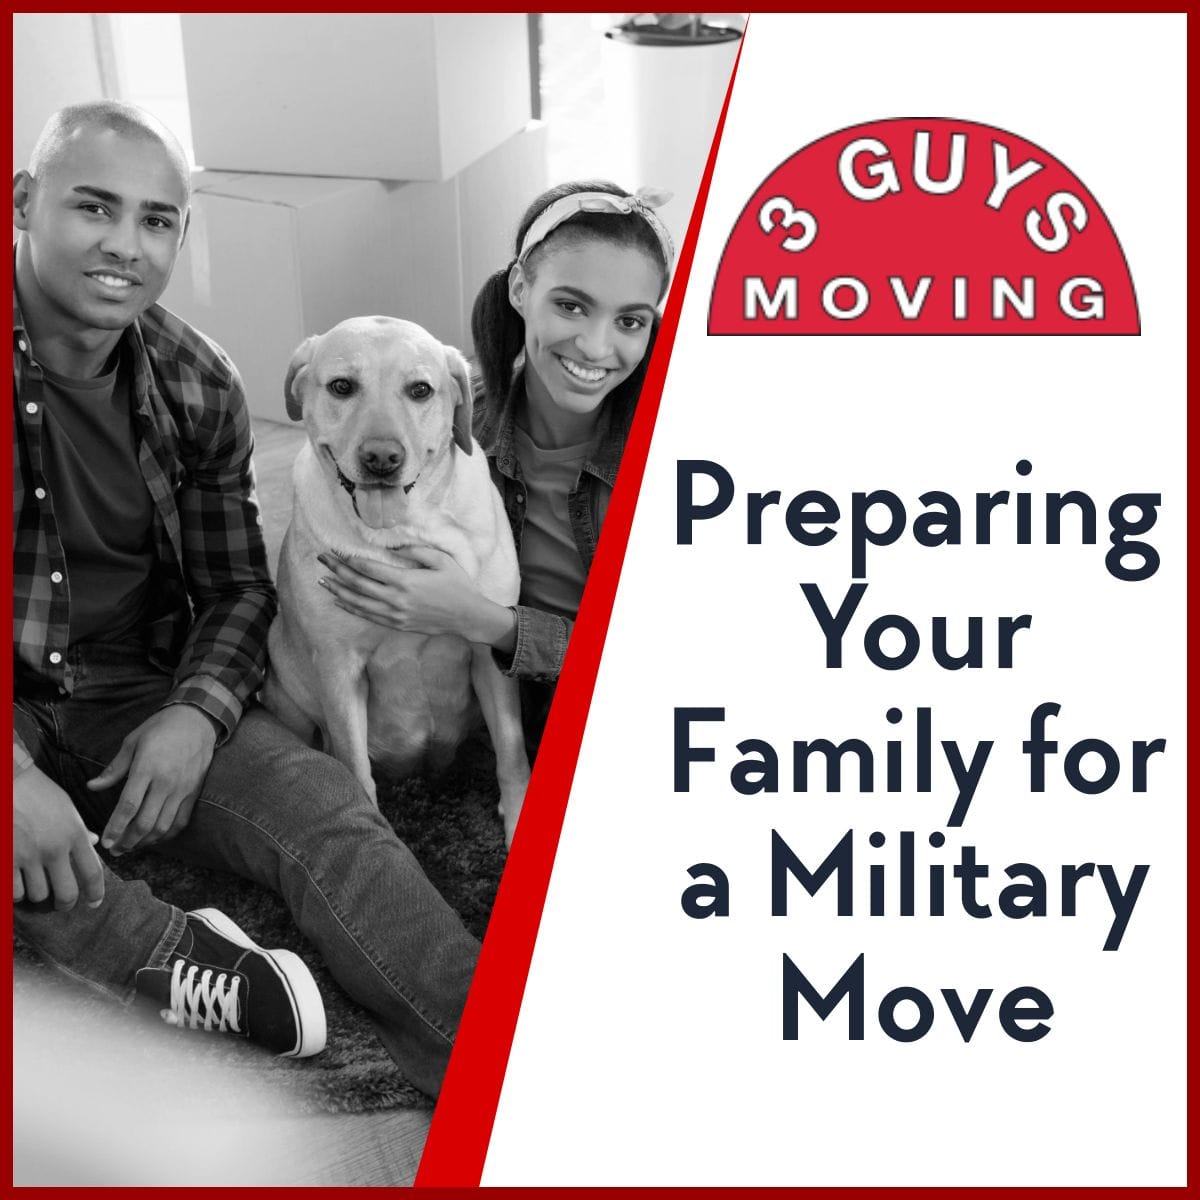 Preparing Your Family for a Military Move - Preparing Your Family for a Military Move